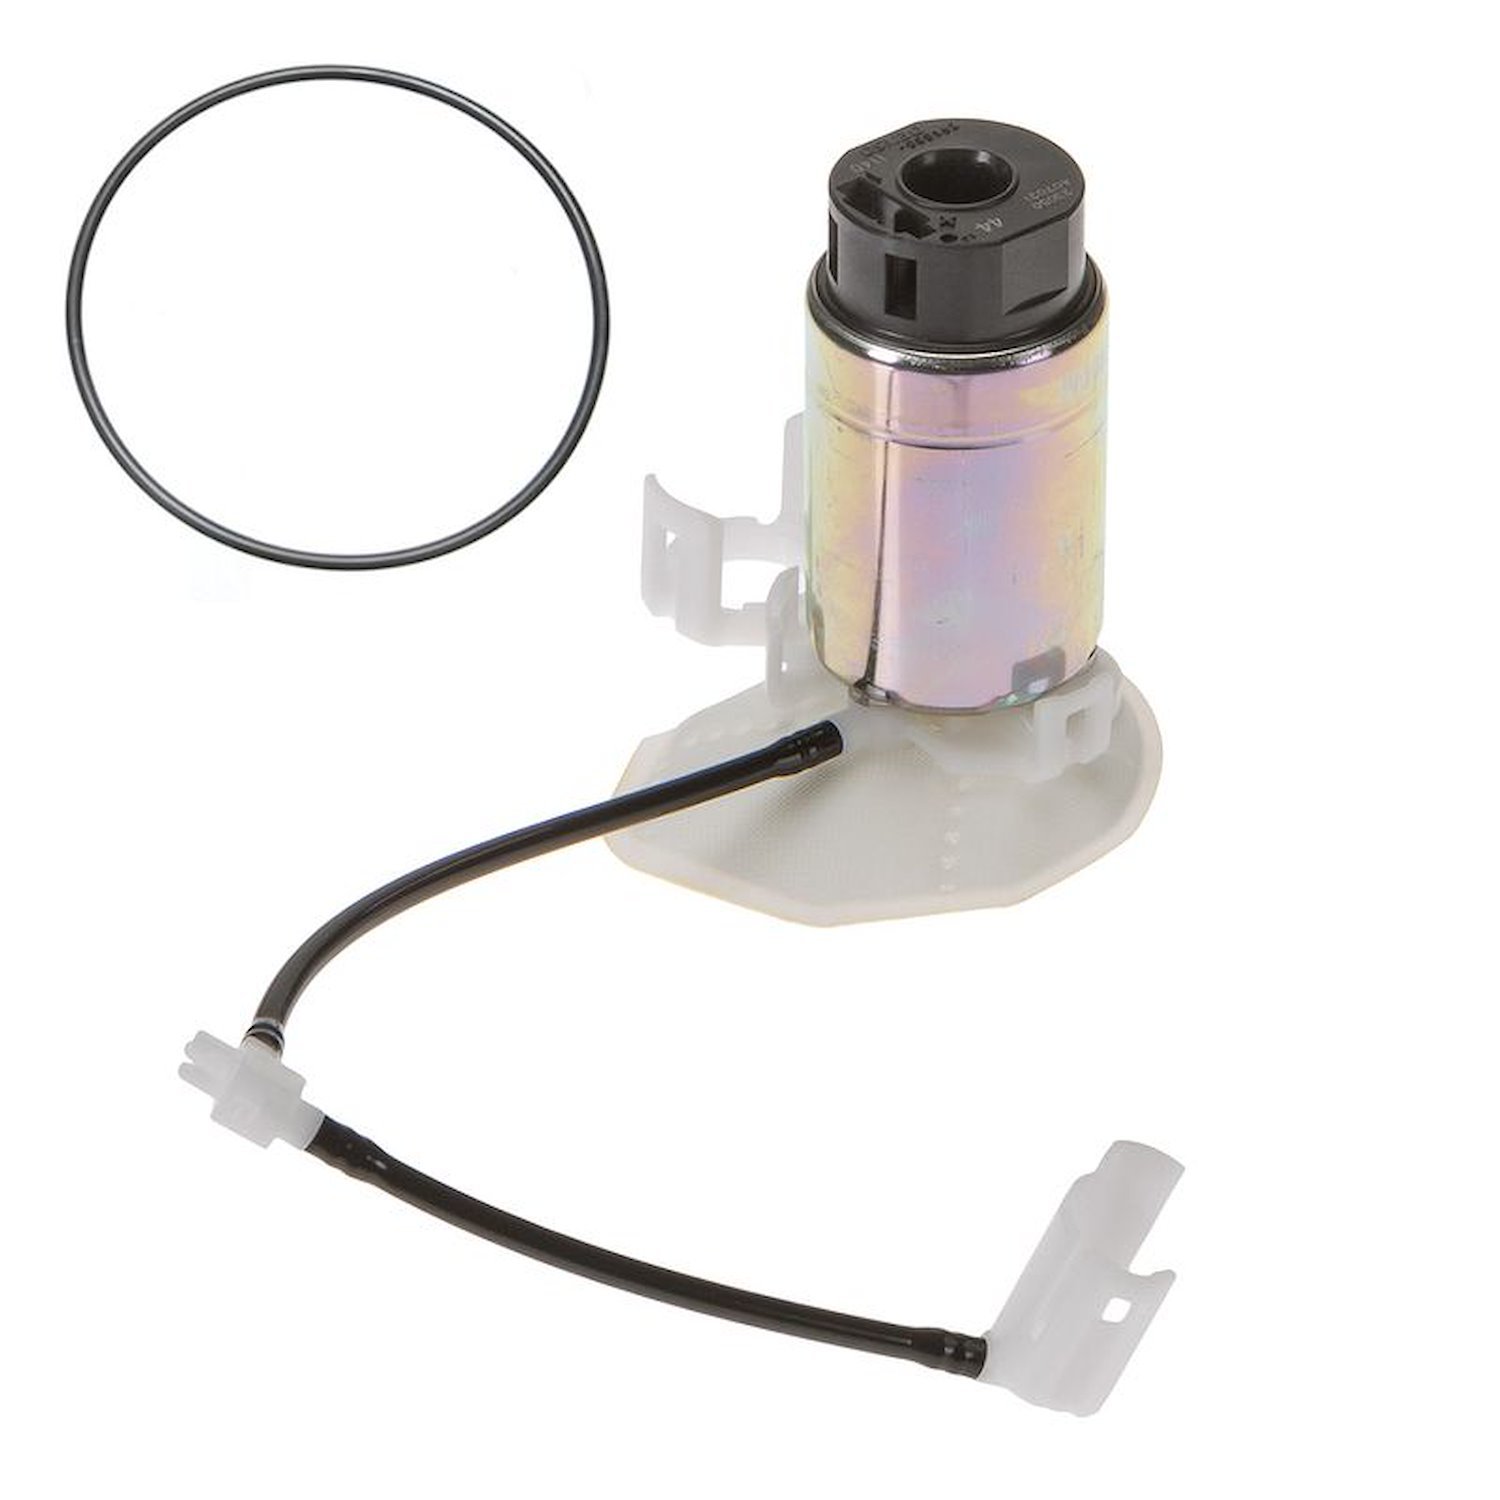 EFI In-Tank Electric Fuel Pump and Strainer Set